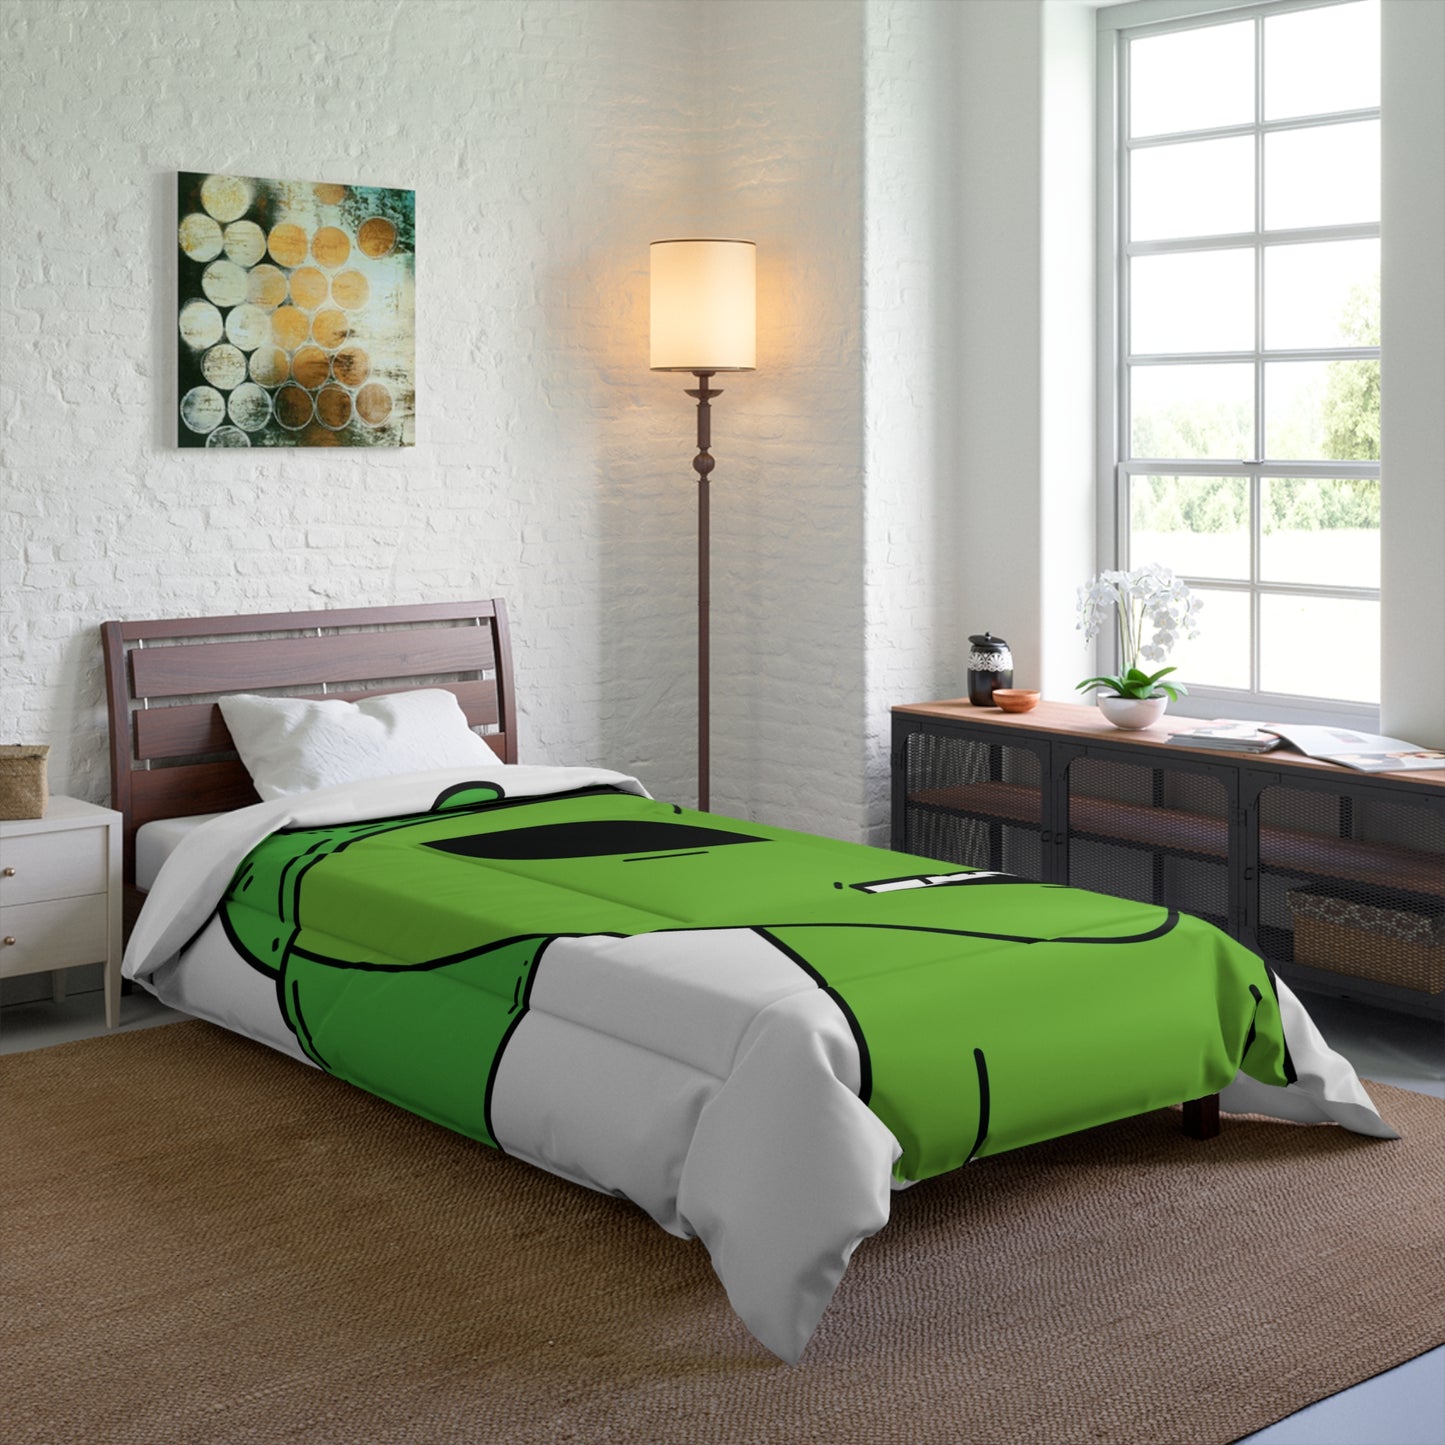 The Green Alien Visitor with Hat Bed Comforter